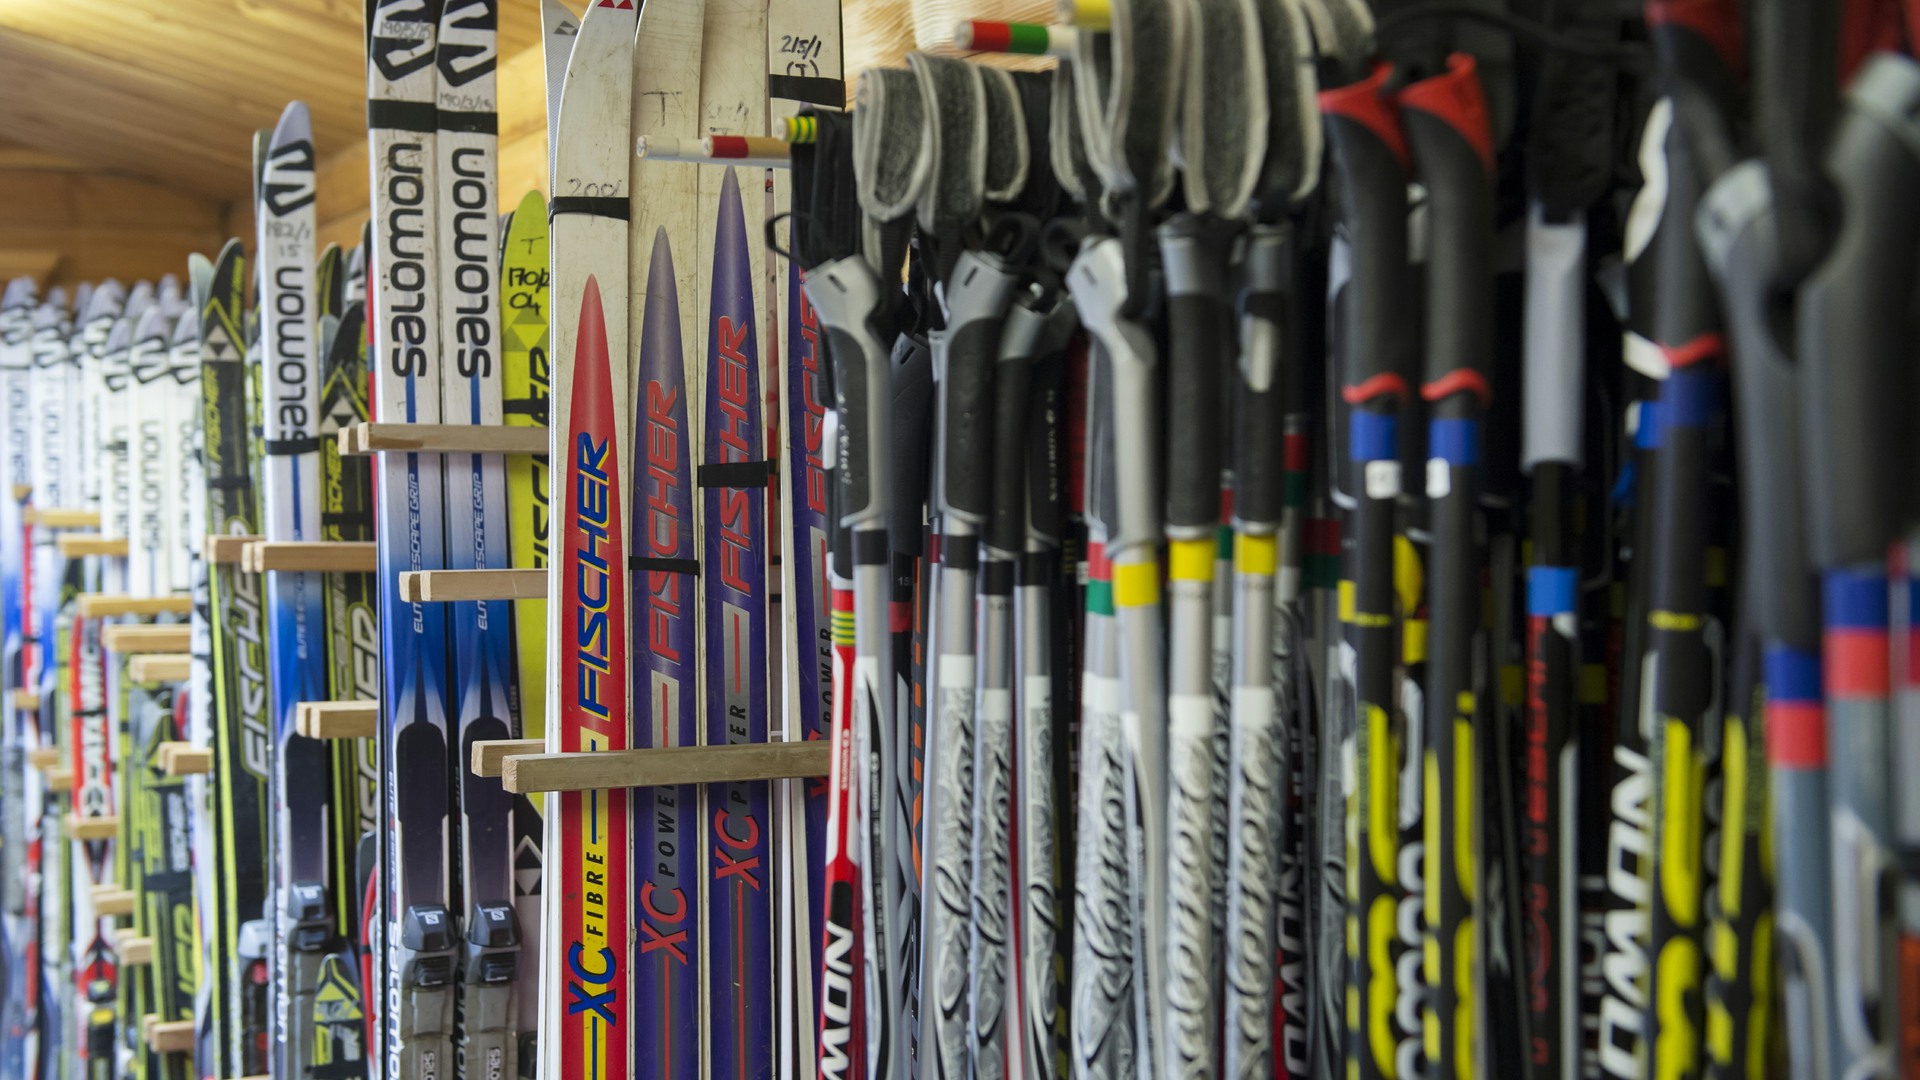 A selection of skis available in the ski shop